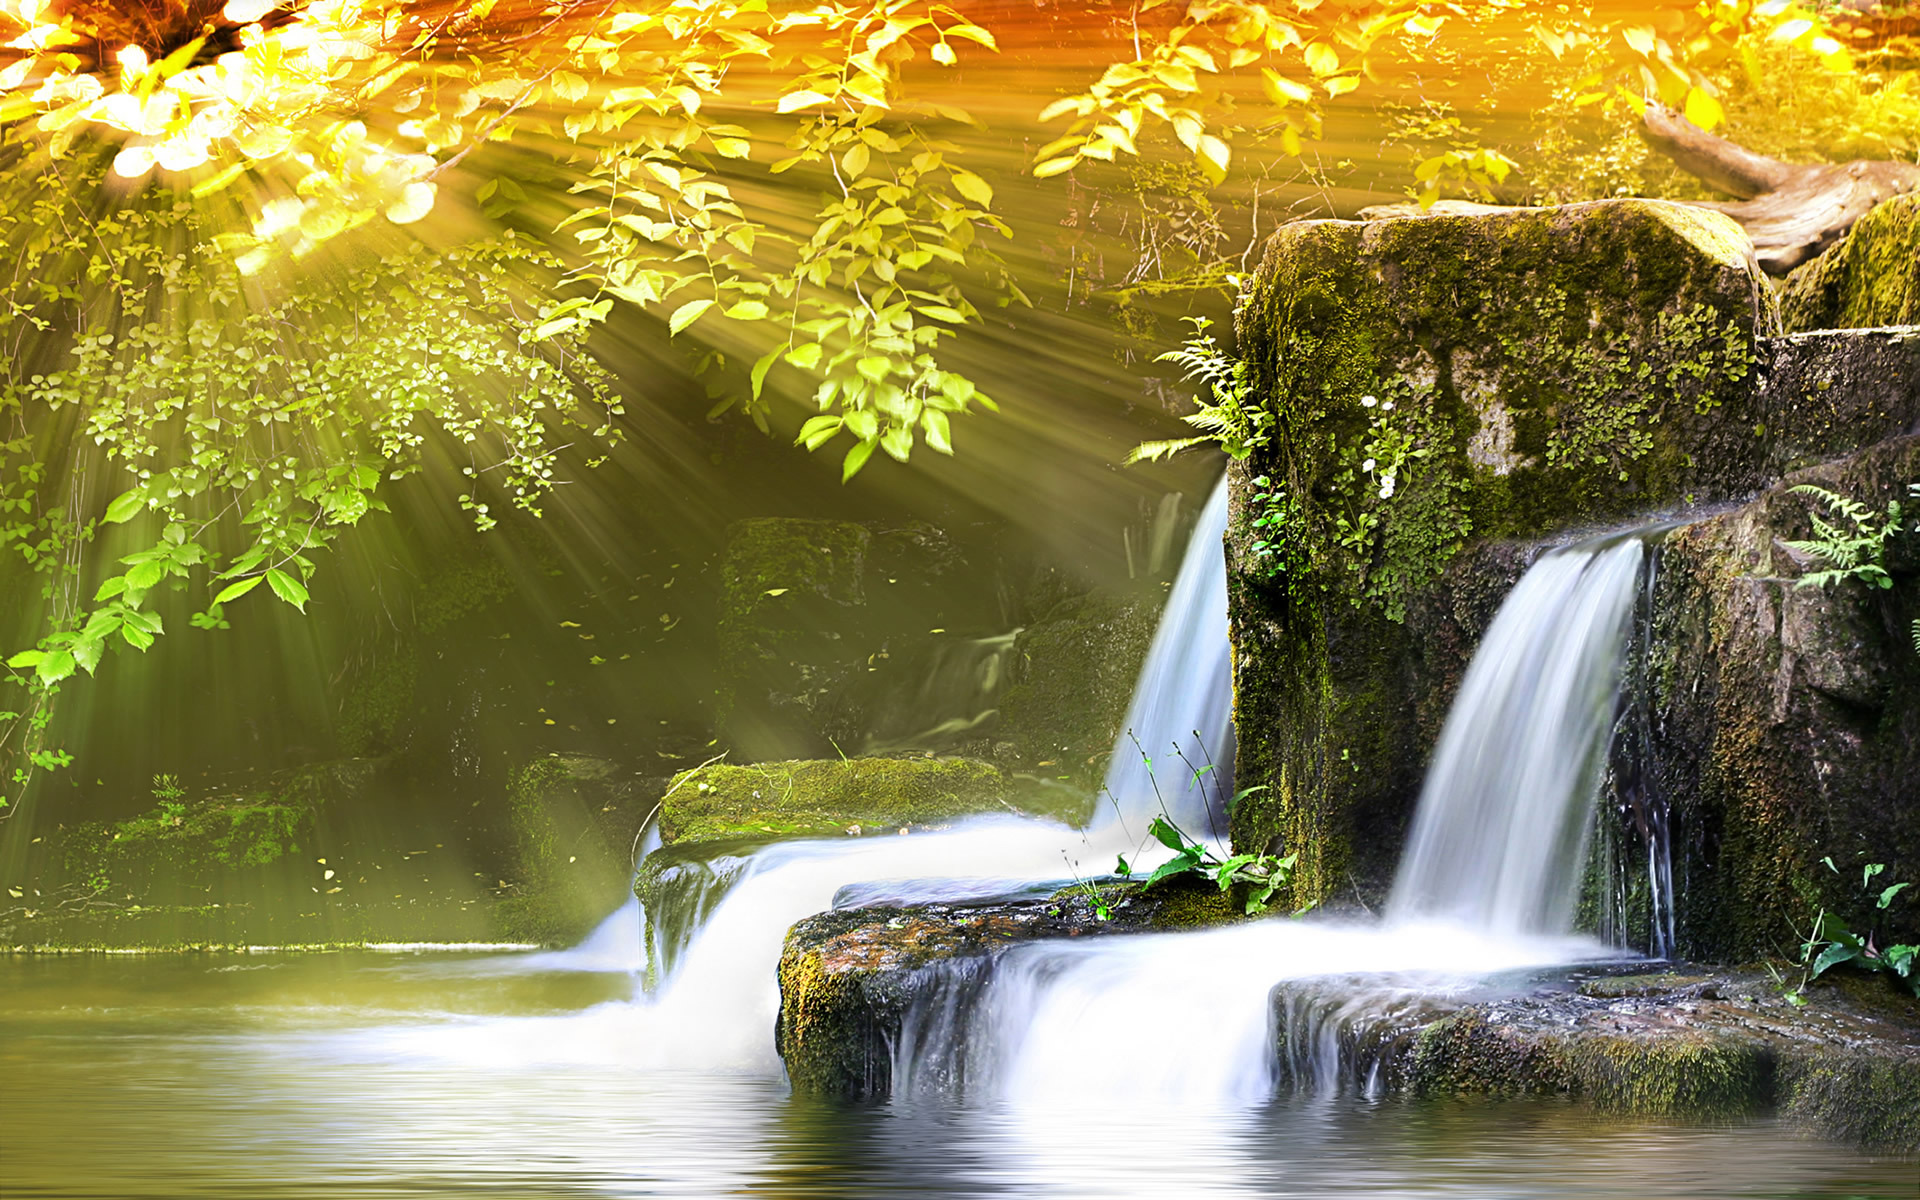 Awesome Nature Wallpapers HD wallpapers   Awesome Nature Wallpapers 1920x1200